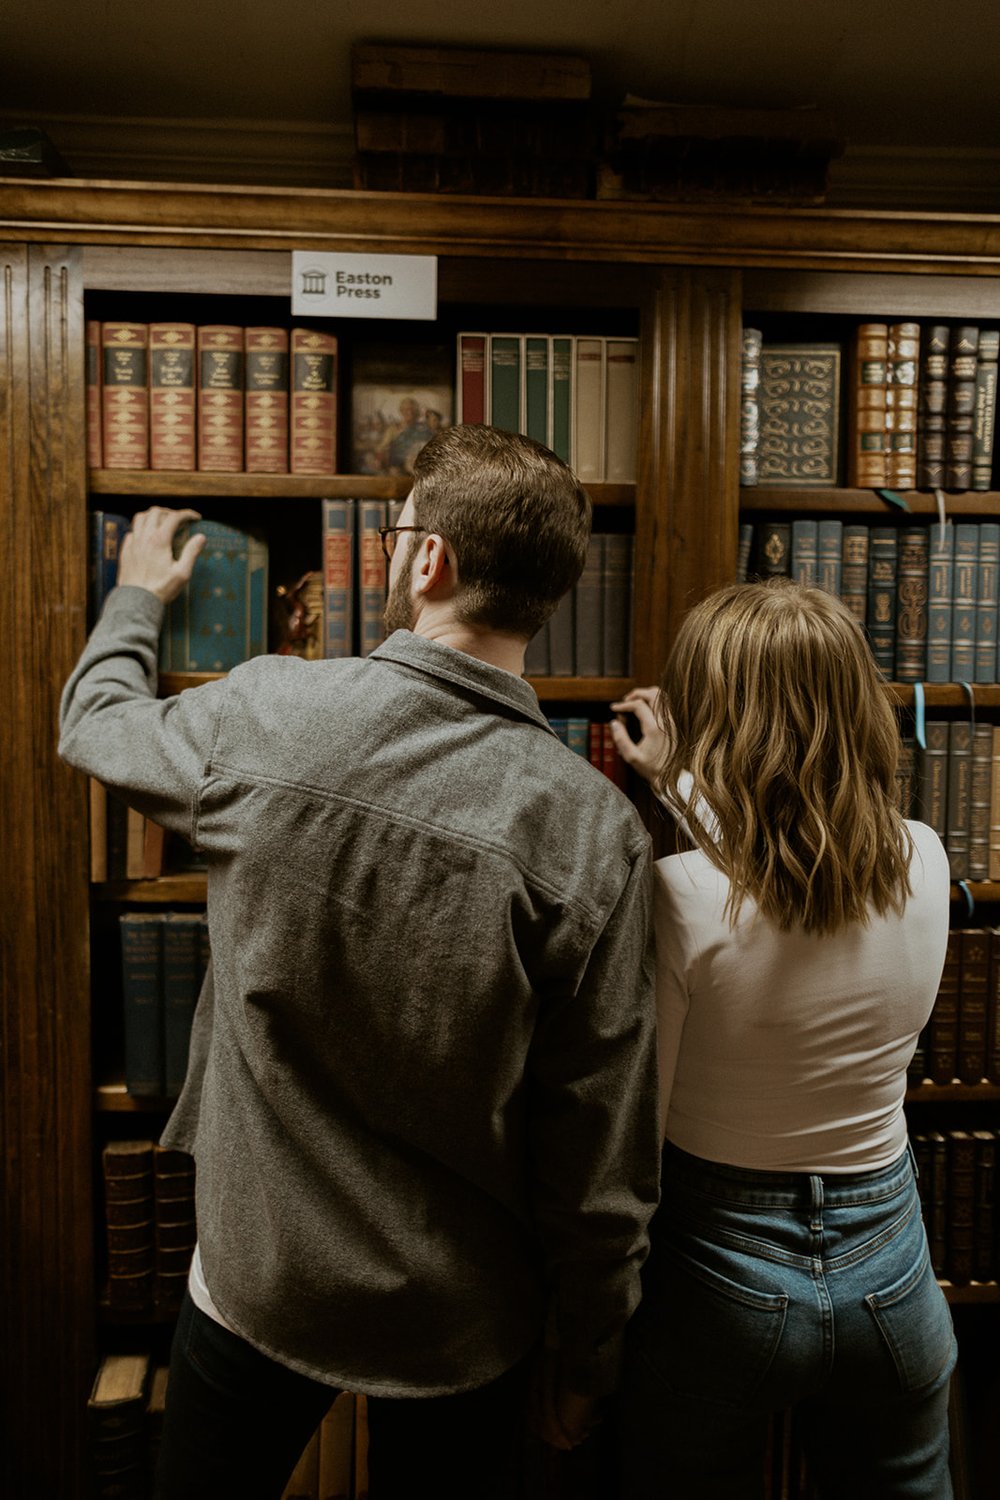 The couple search for a book to read together in their favorite book store.